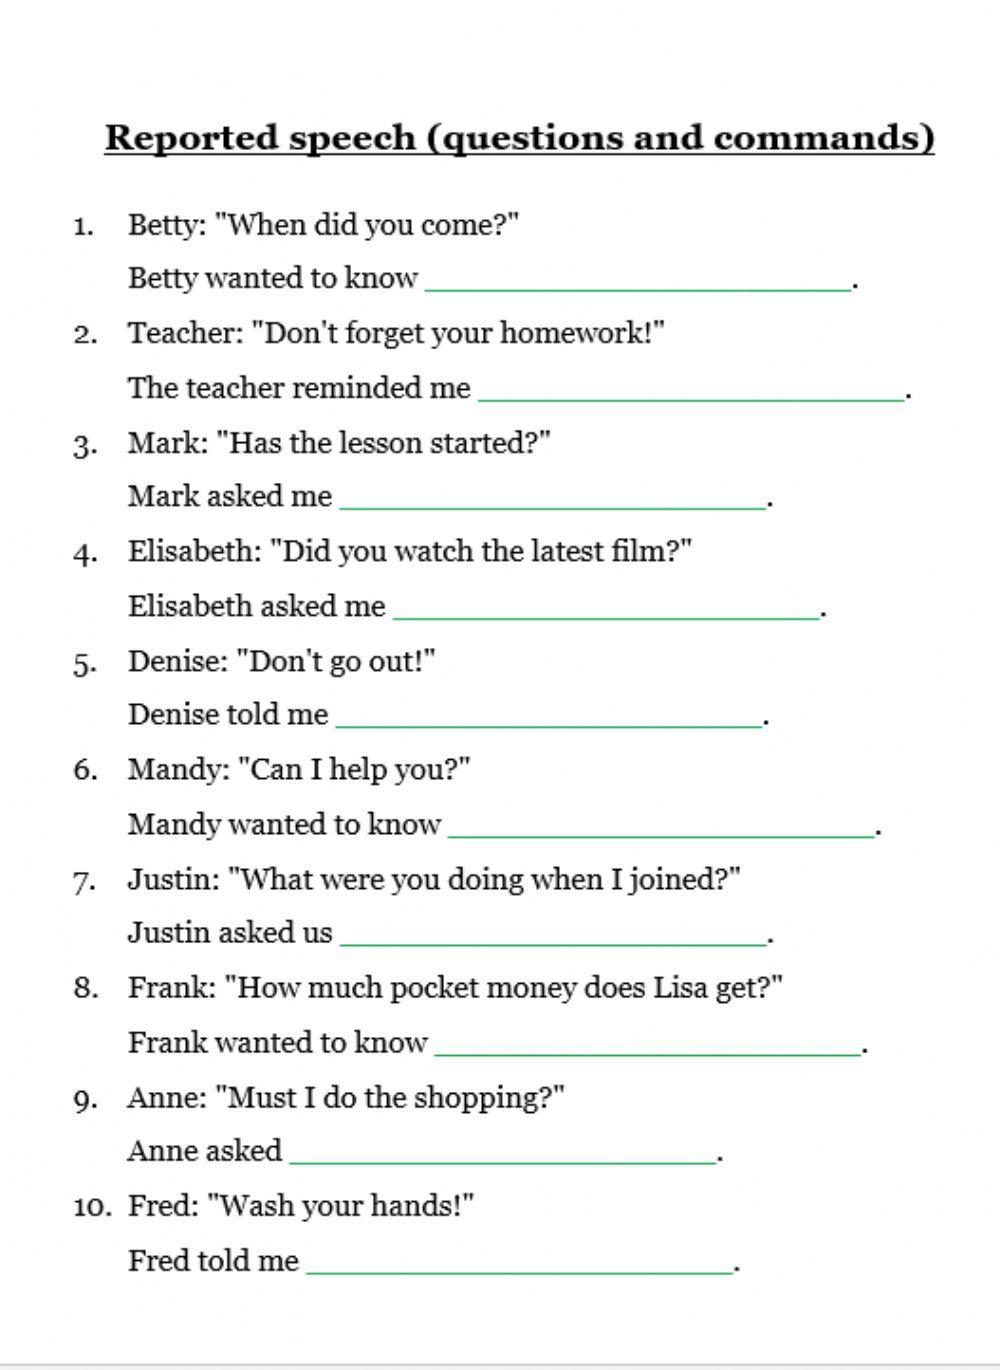 reported speech objective questions